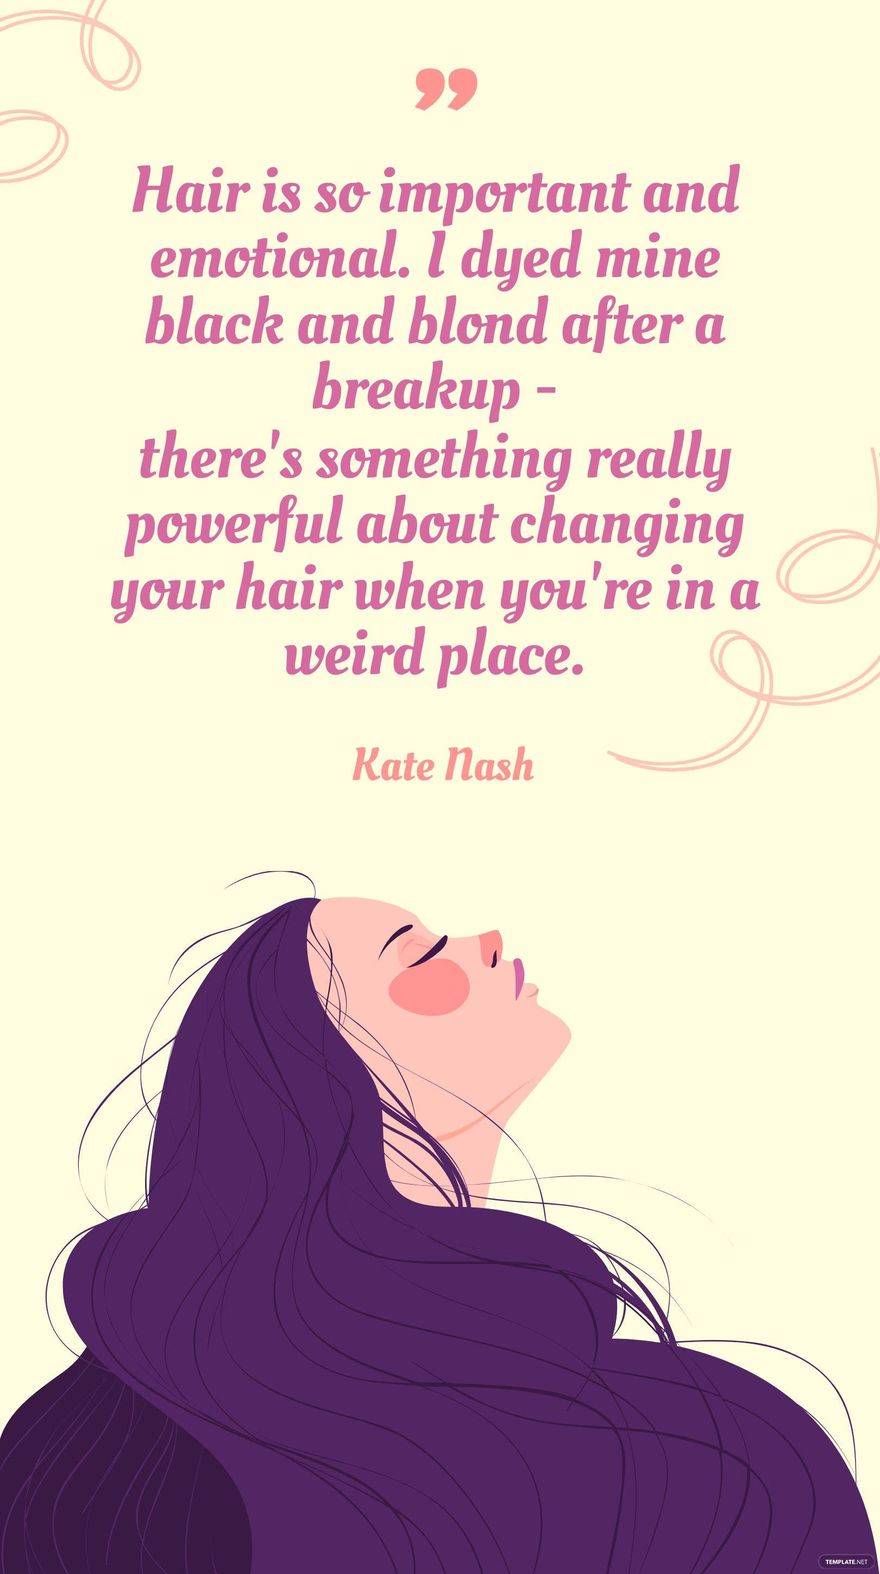 Kate Nash - Hair is so important and emotional. I dyed mine black and blond after a breakup - there's something really powerful about changing your hair when you're in a weird place.